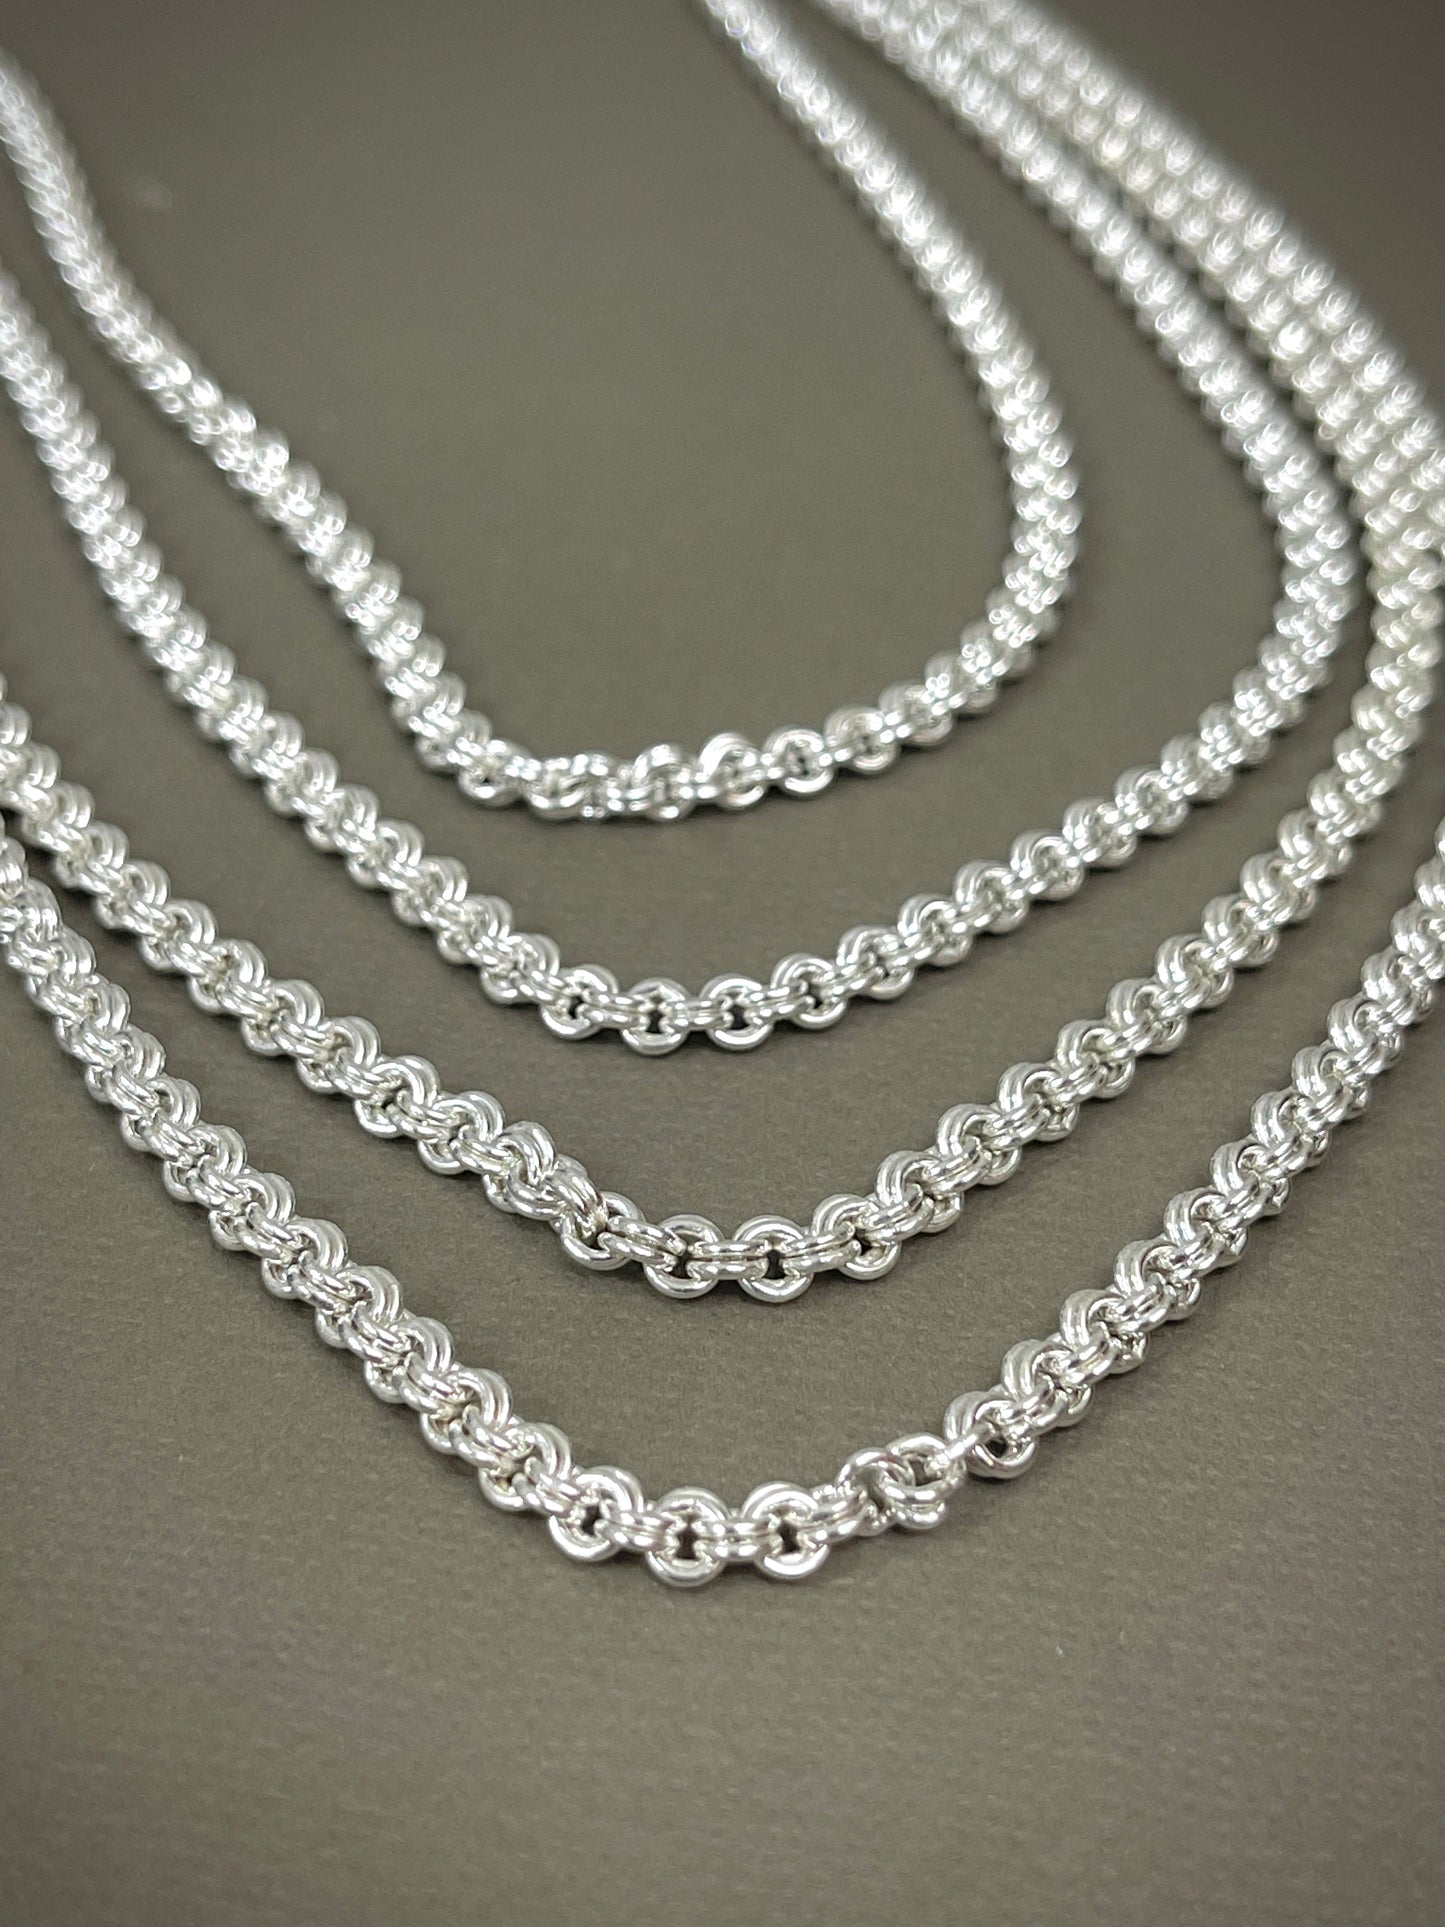 3mm Sterling Double Cable Chains - 16"-22"